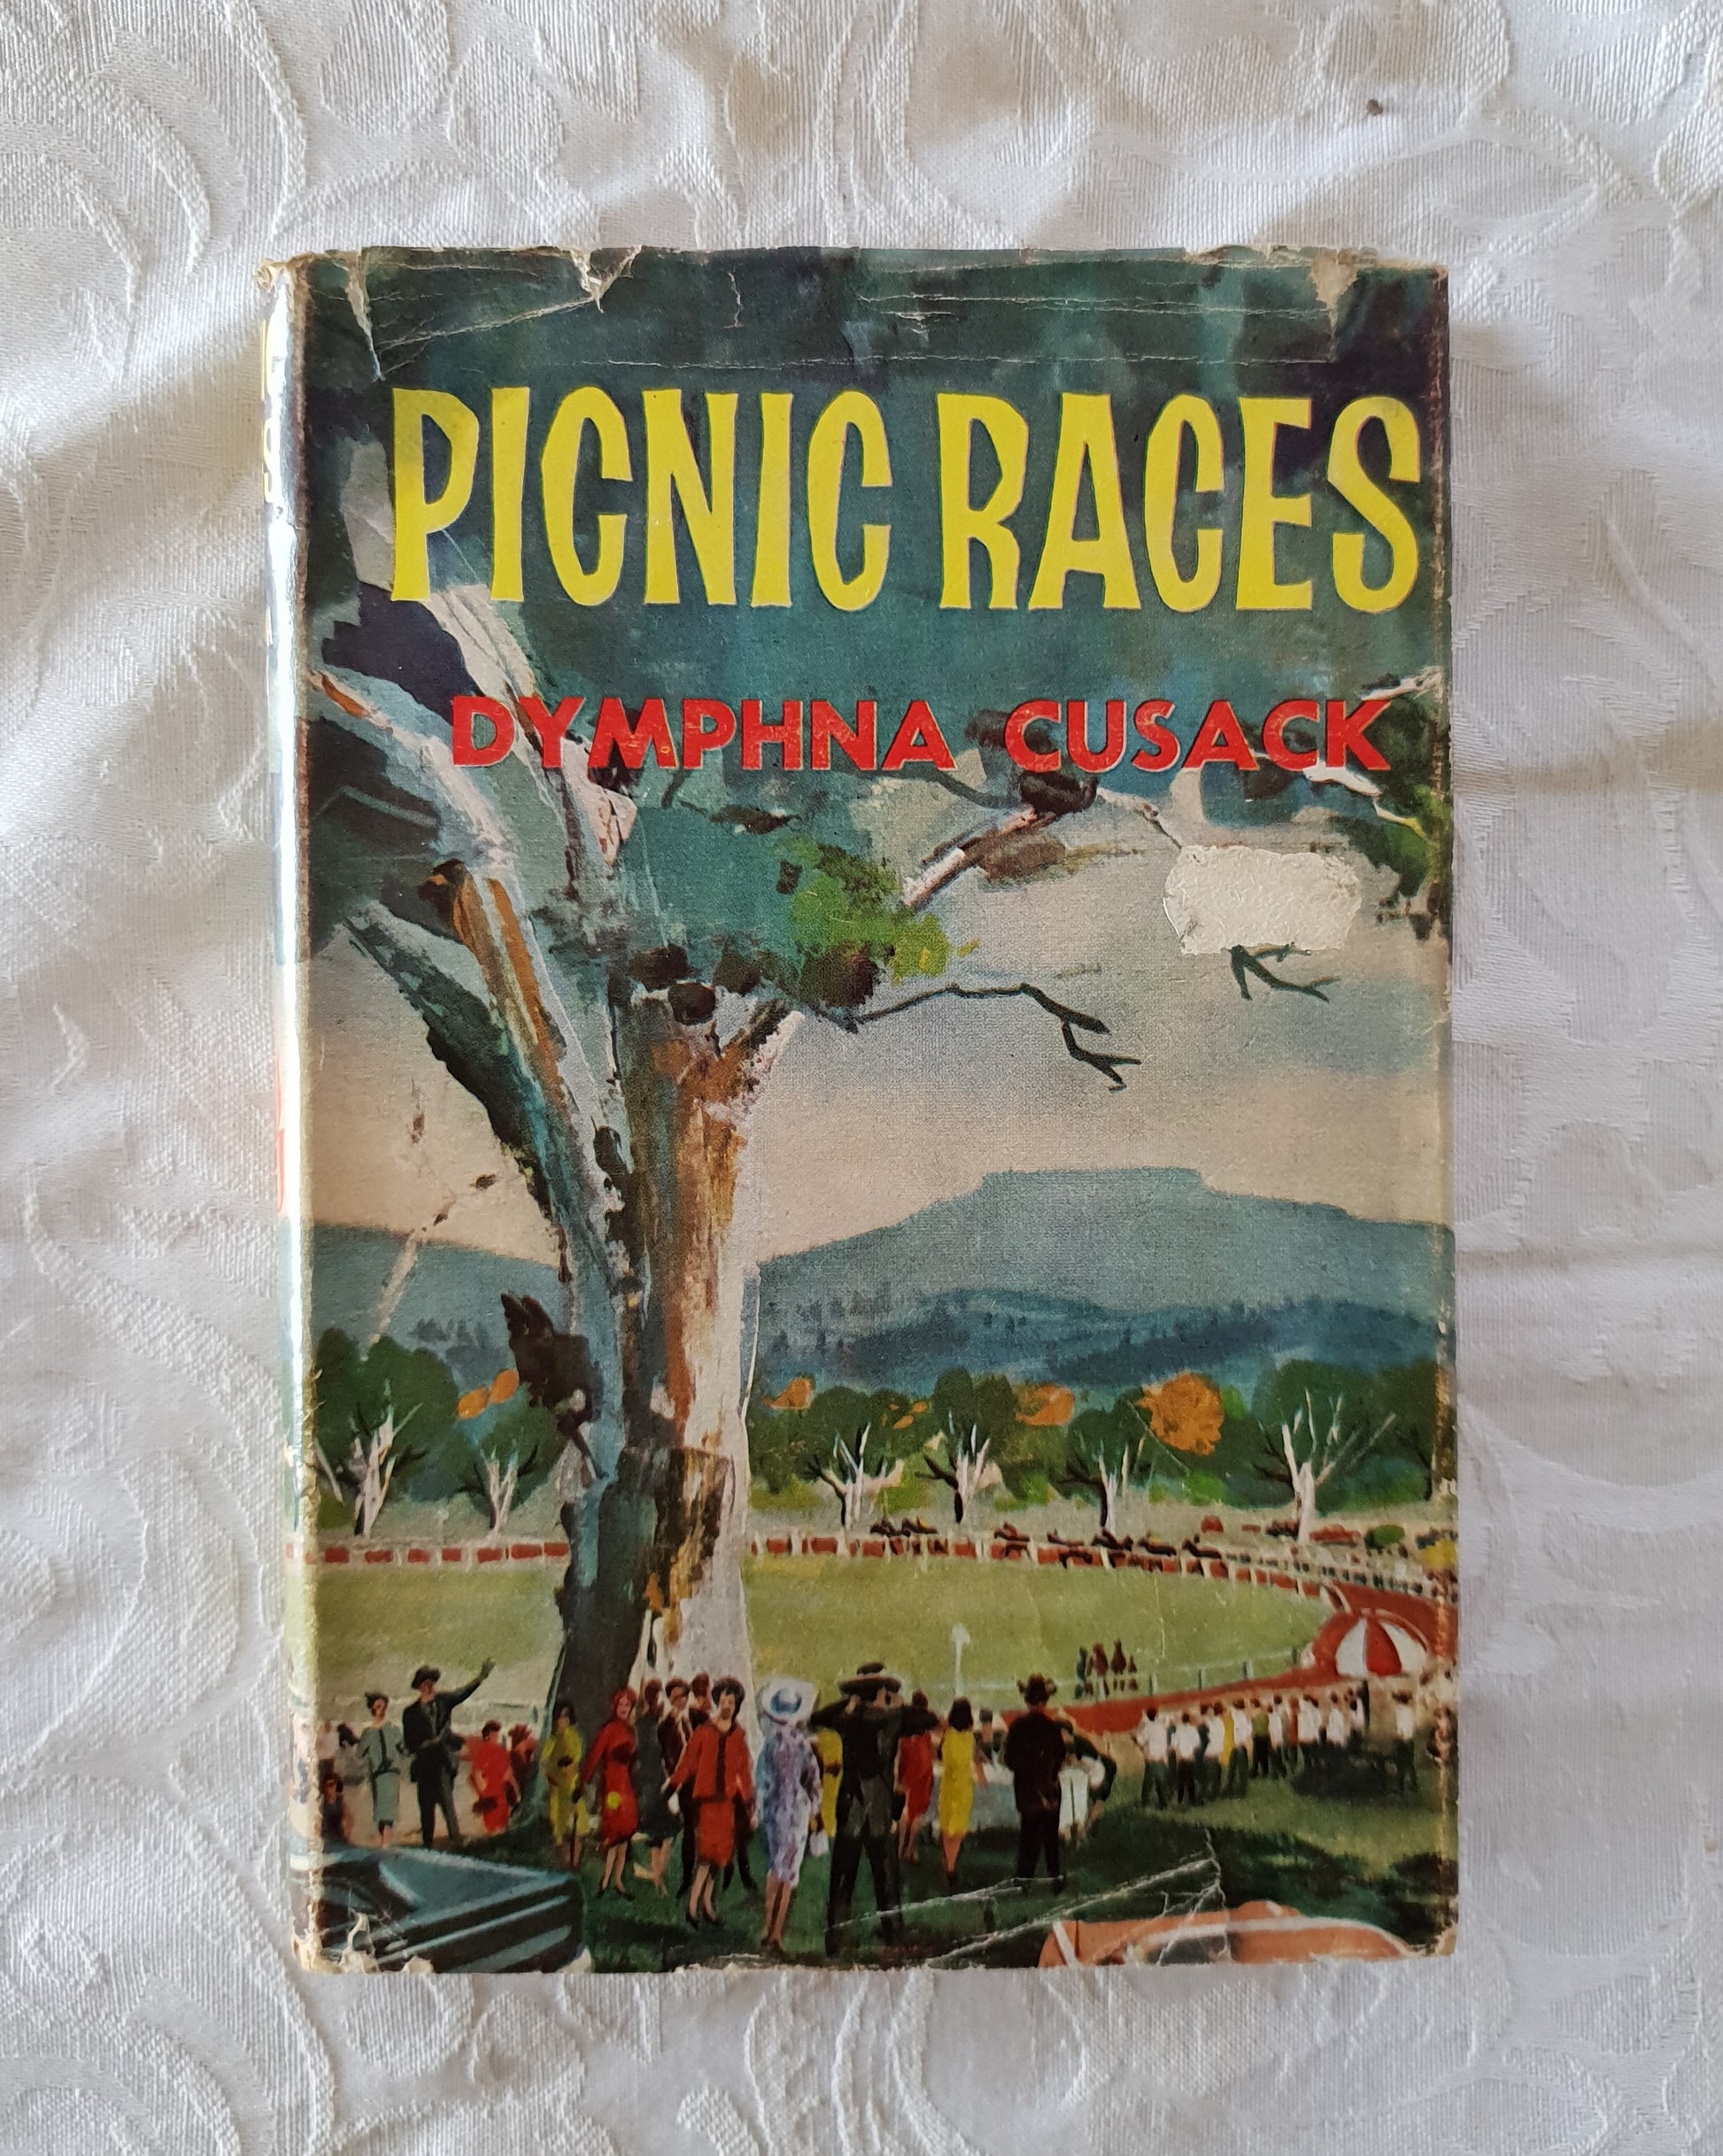 Picnic Races by Dymphna Cusack